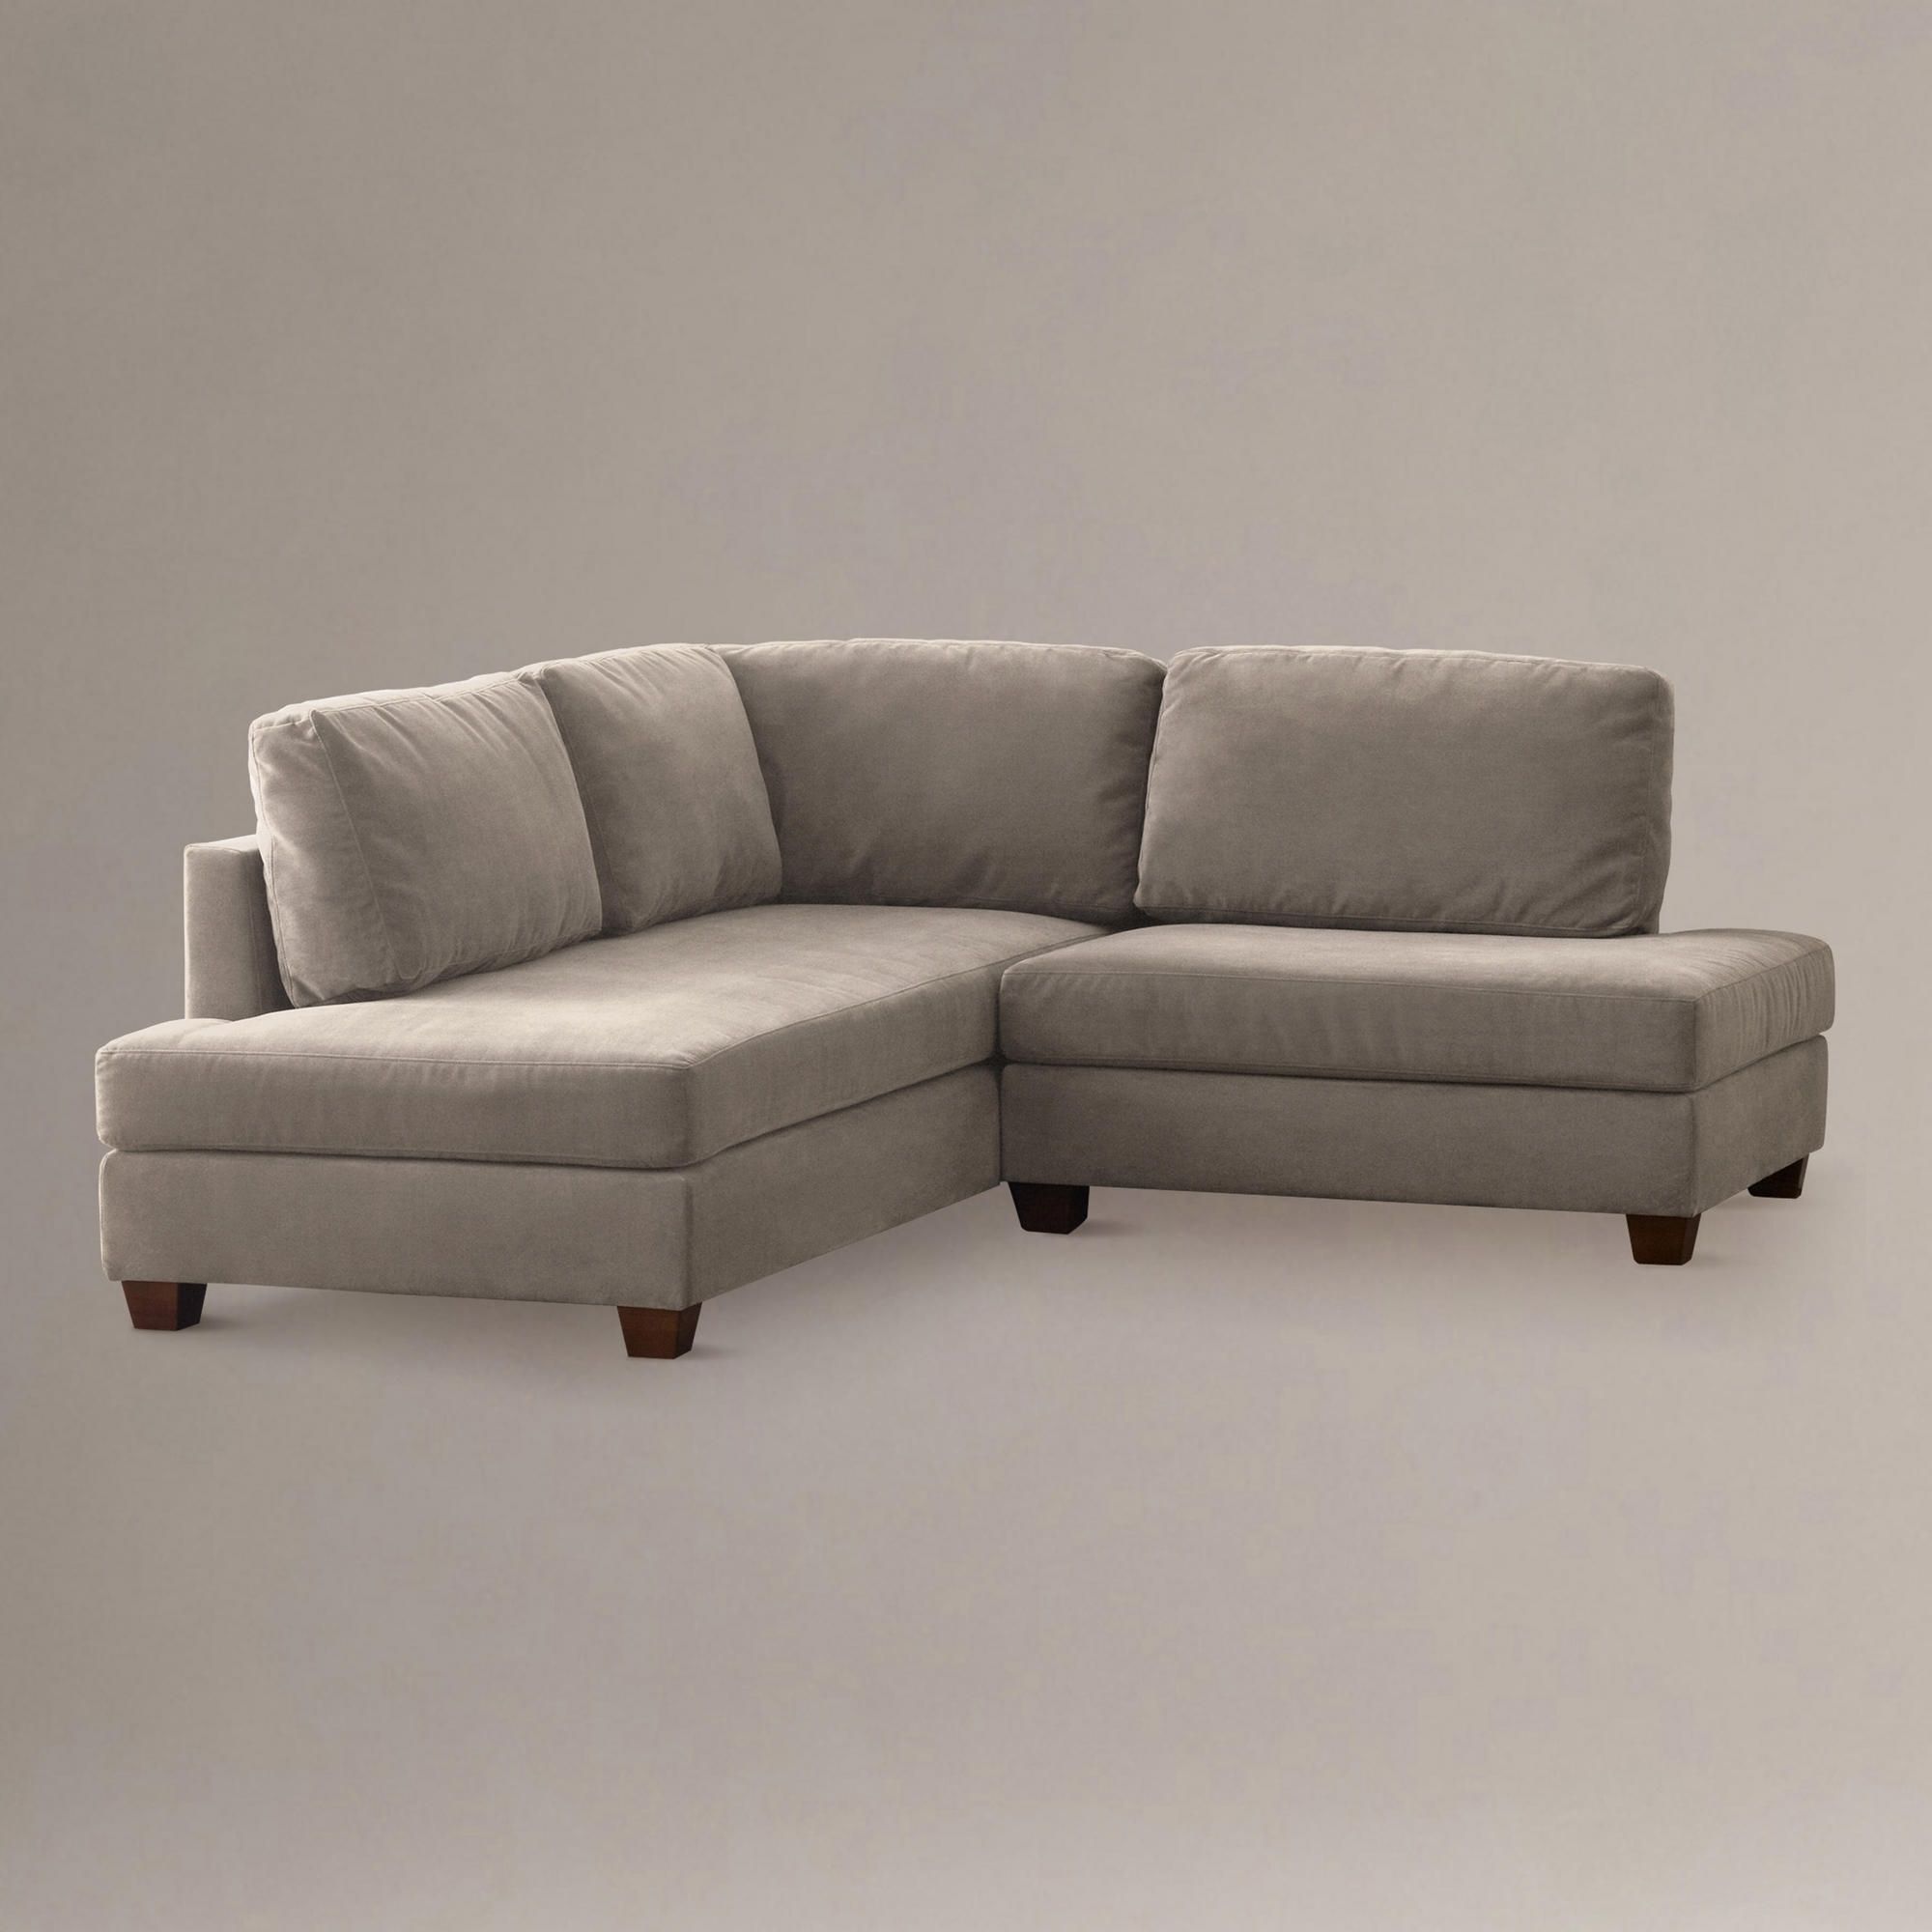 Most Recent Amazing Armless Sectional Sofas Small Spaces – Mediasupload With Armless Sectional Sofas (View 3 of 15)